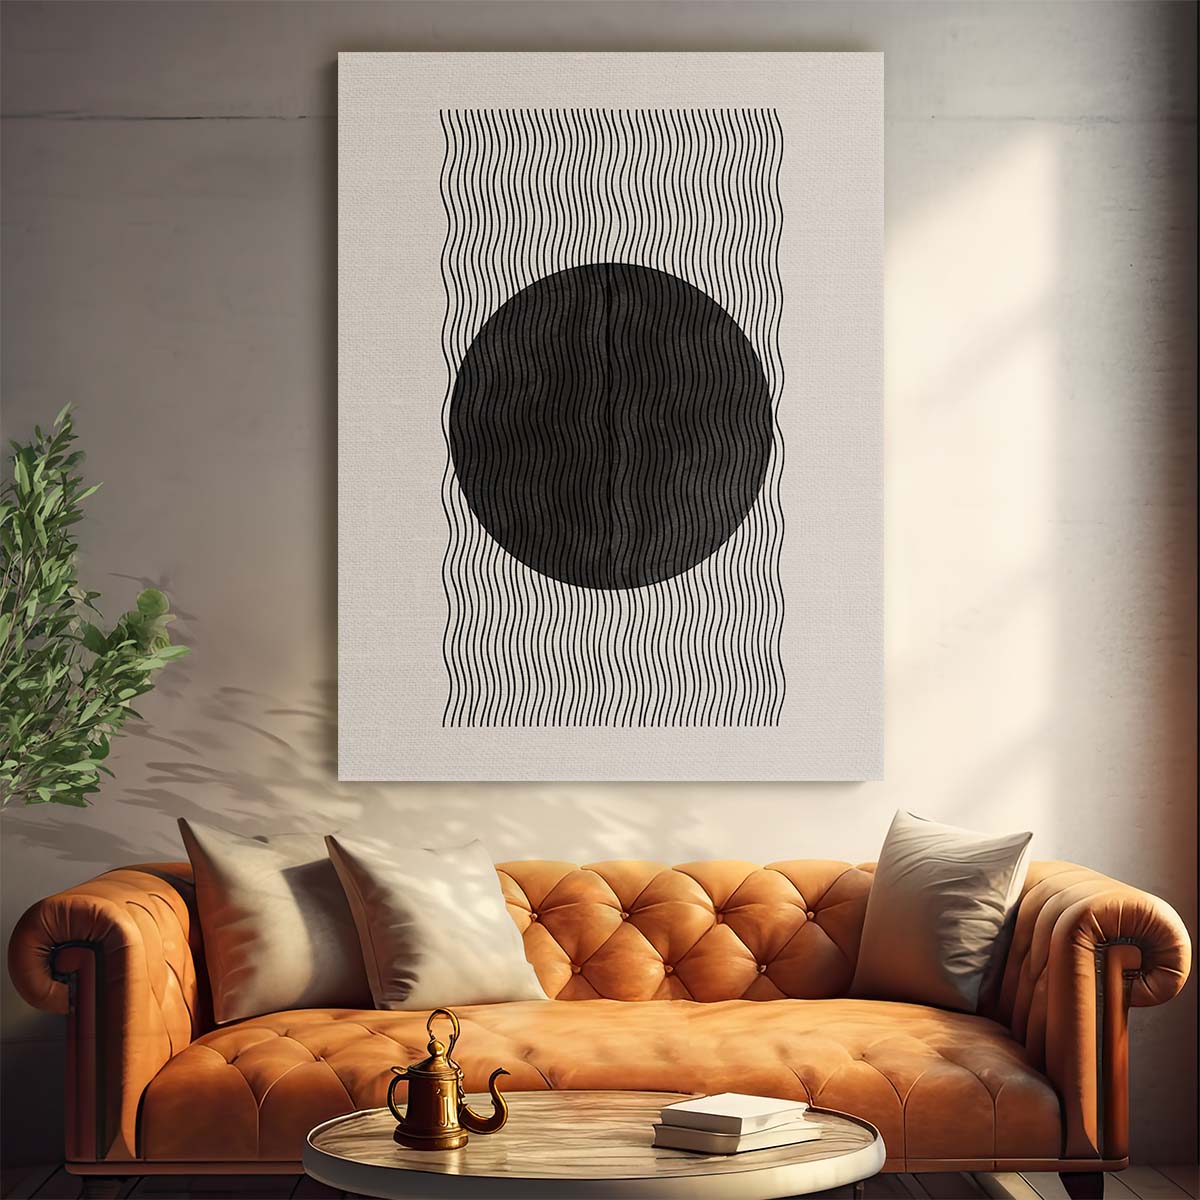 Abstract Geometric Illustration Artwork, BaB No2. by THE MIUUS STUDIO by Luxuriance Designs, made in USA